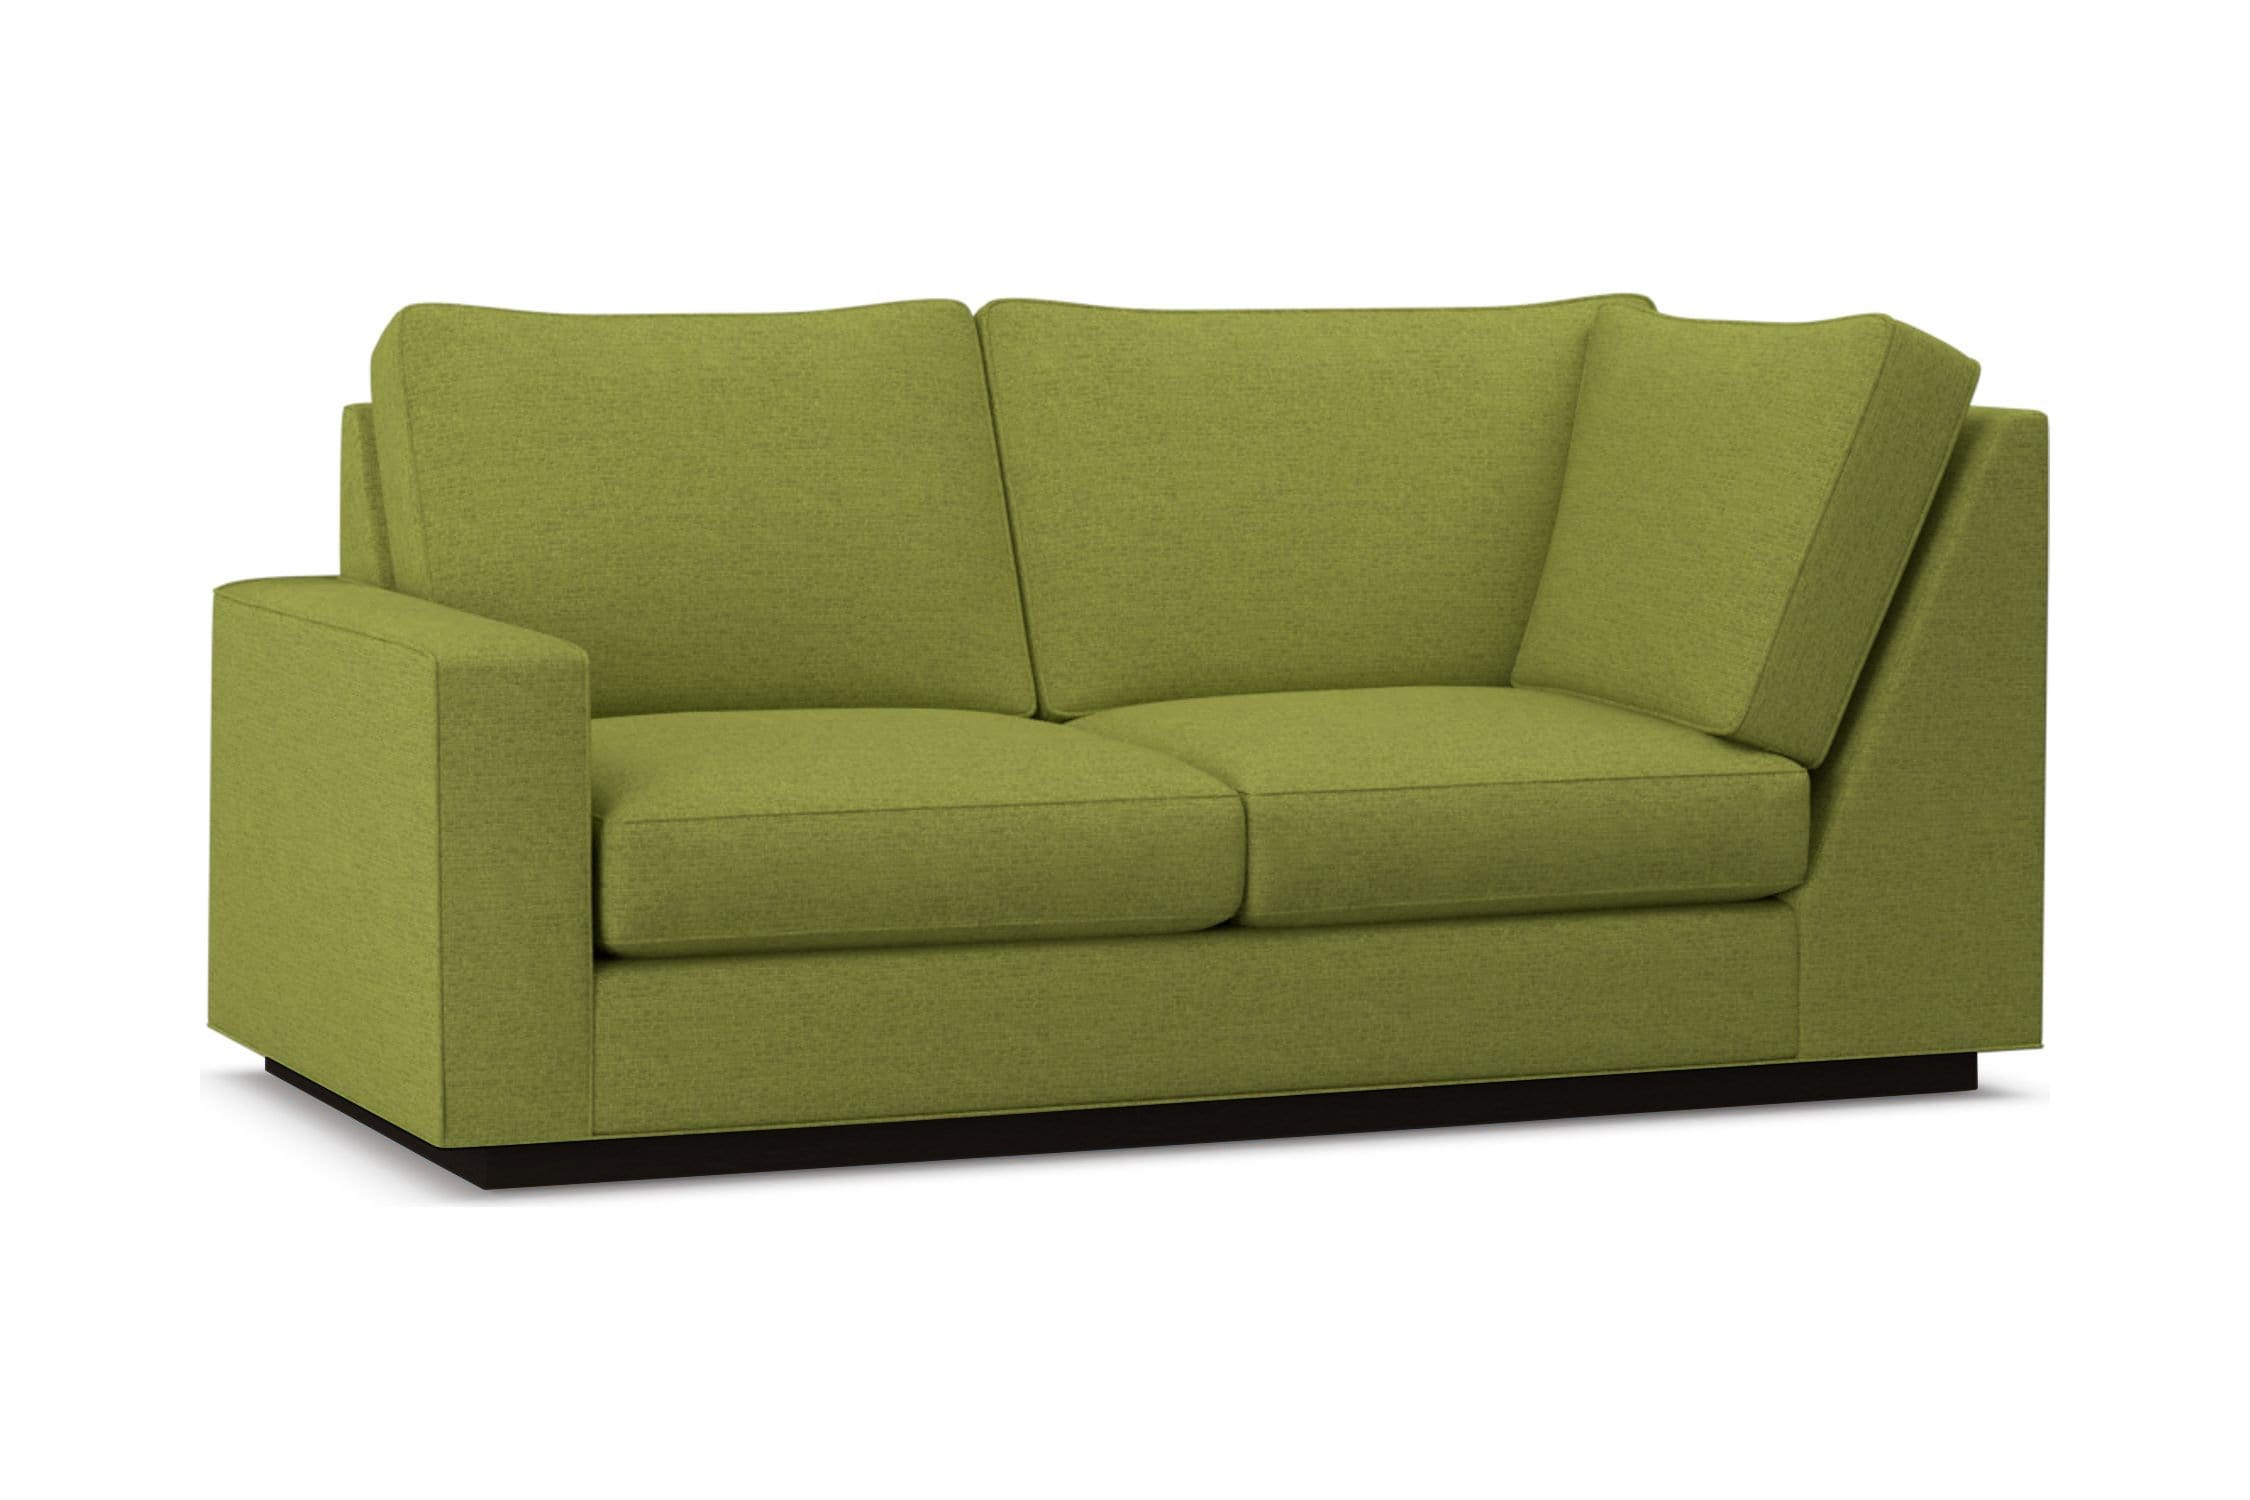 Harper Left Arm Corner Loveseat - Green -  Modular Collection - Build Your Own Sectional